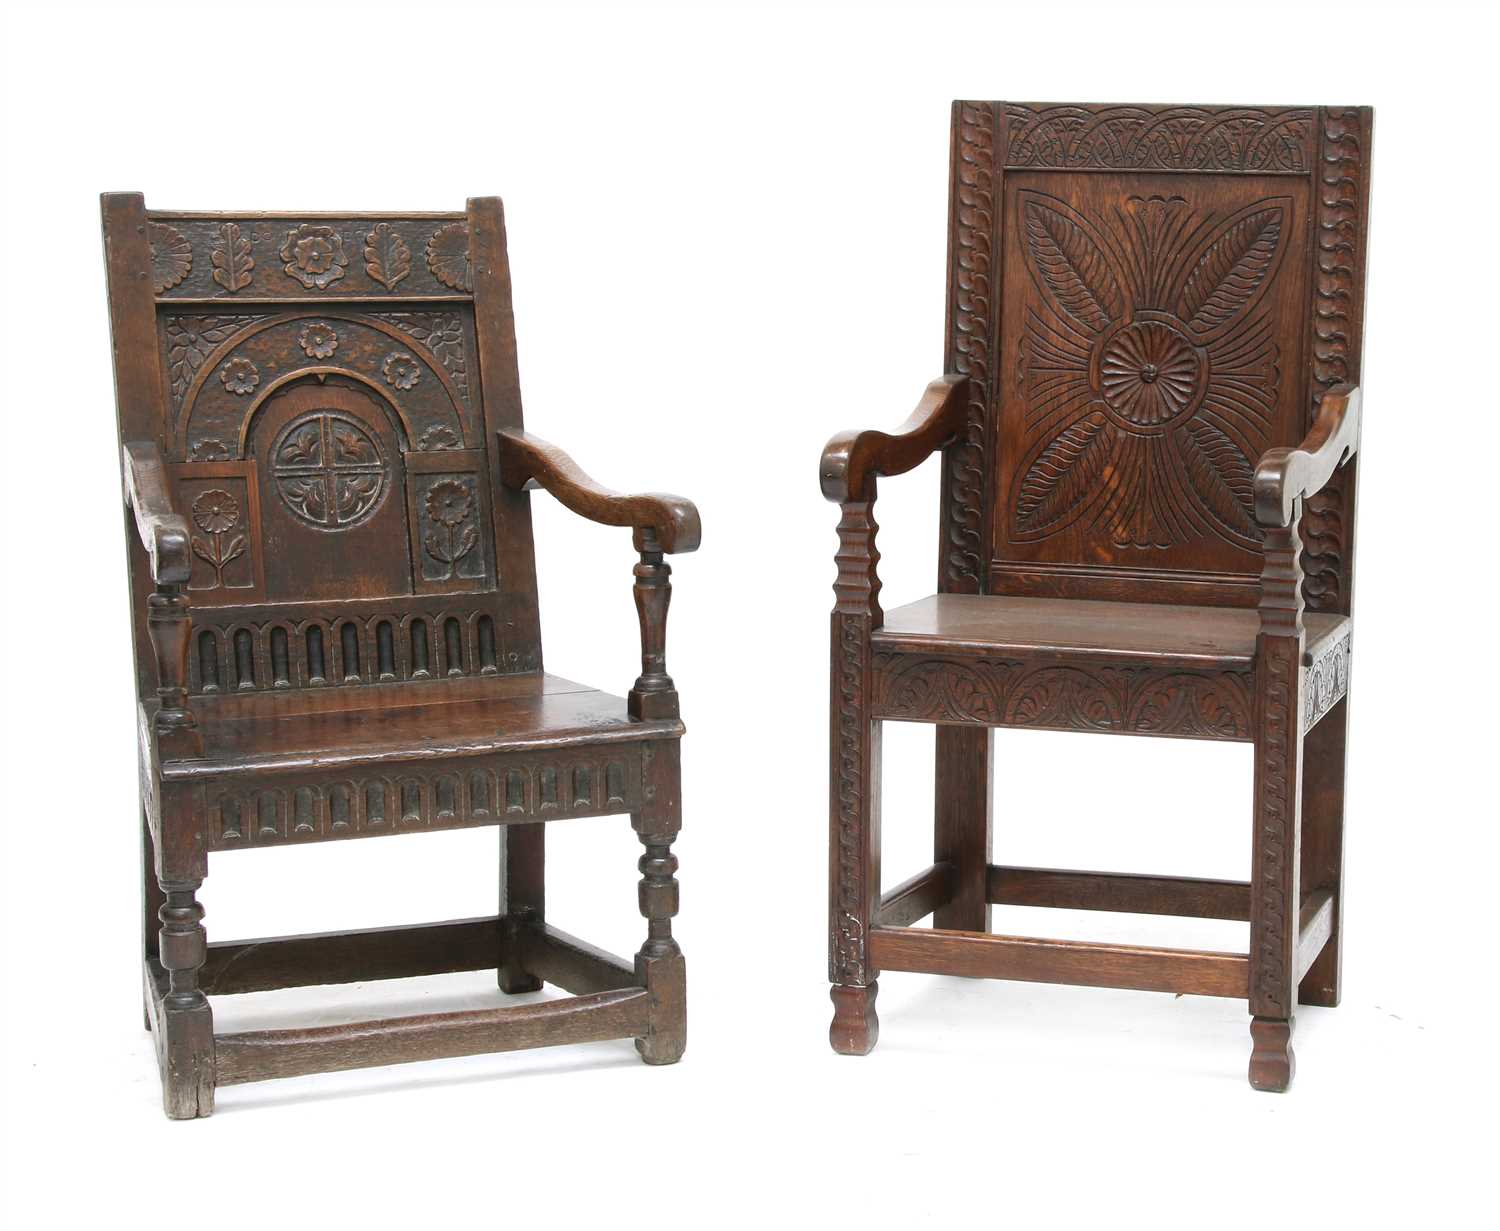 Lot 169 - Two 17th century-style oak wainscot chairs